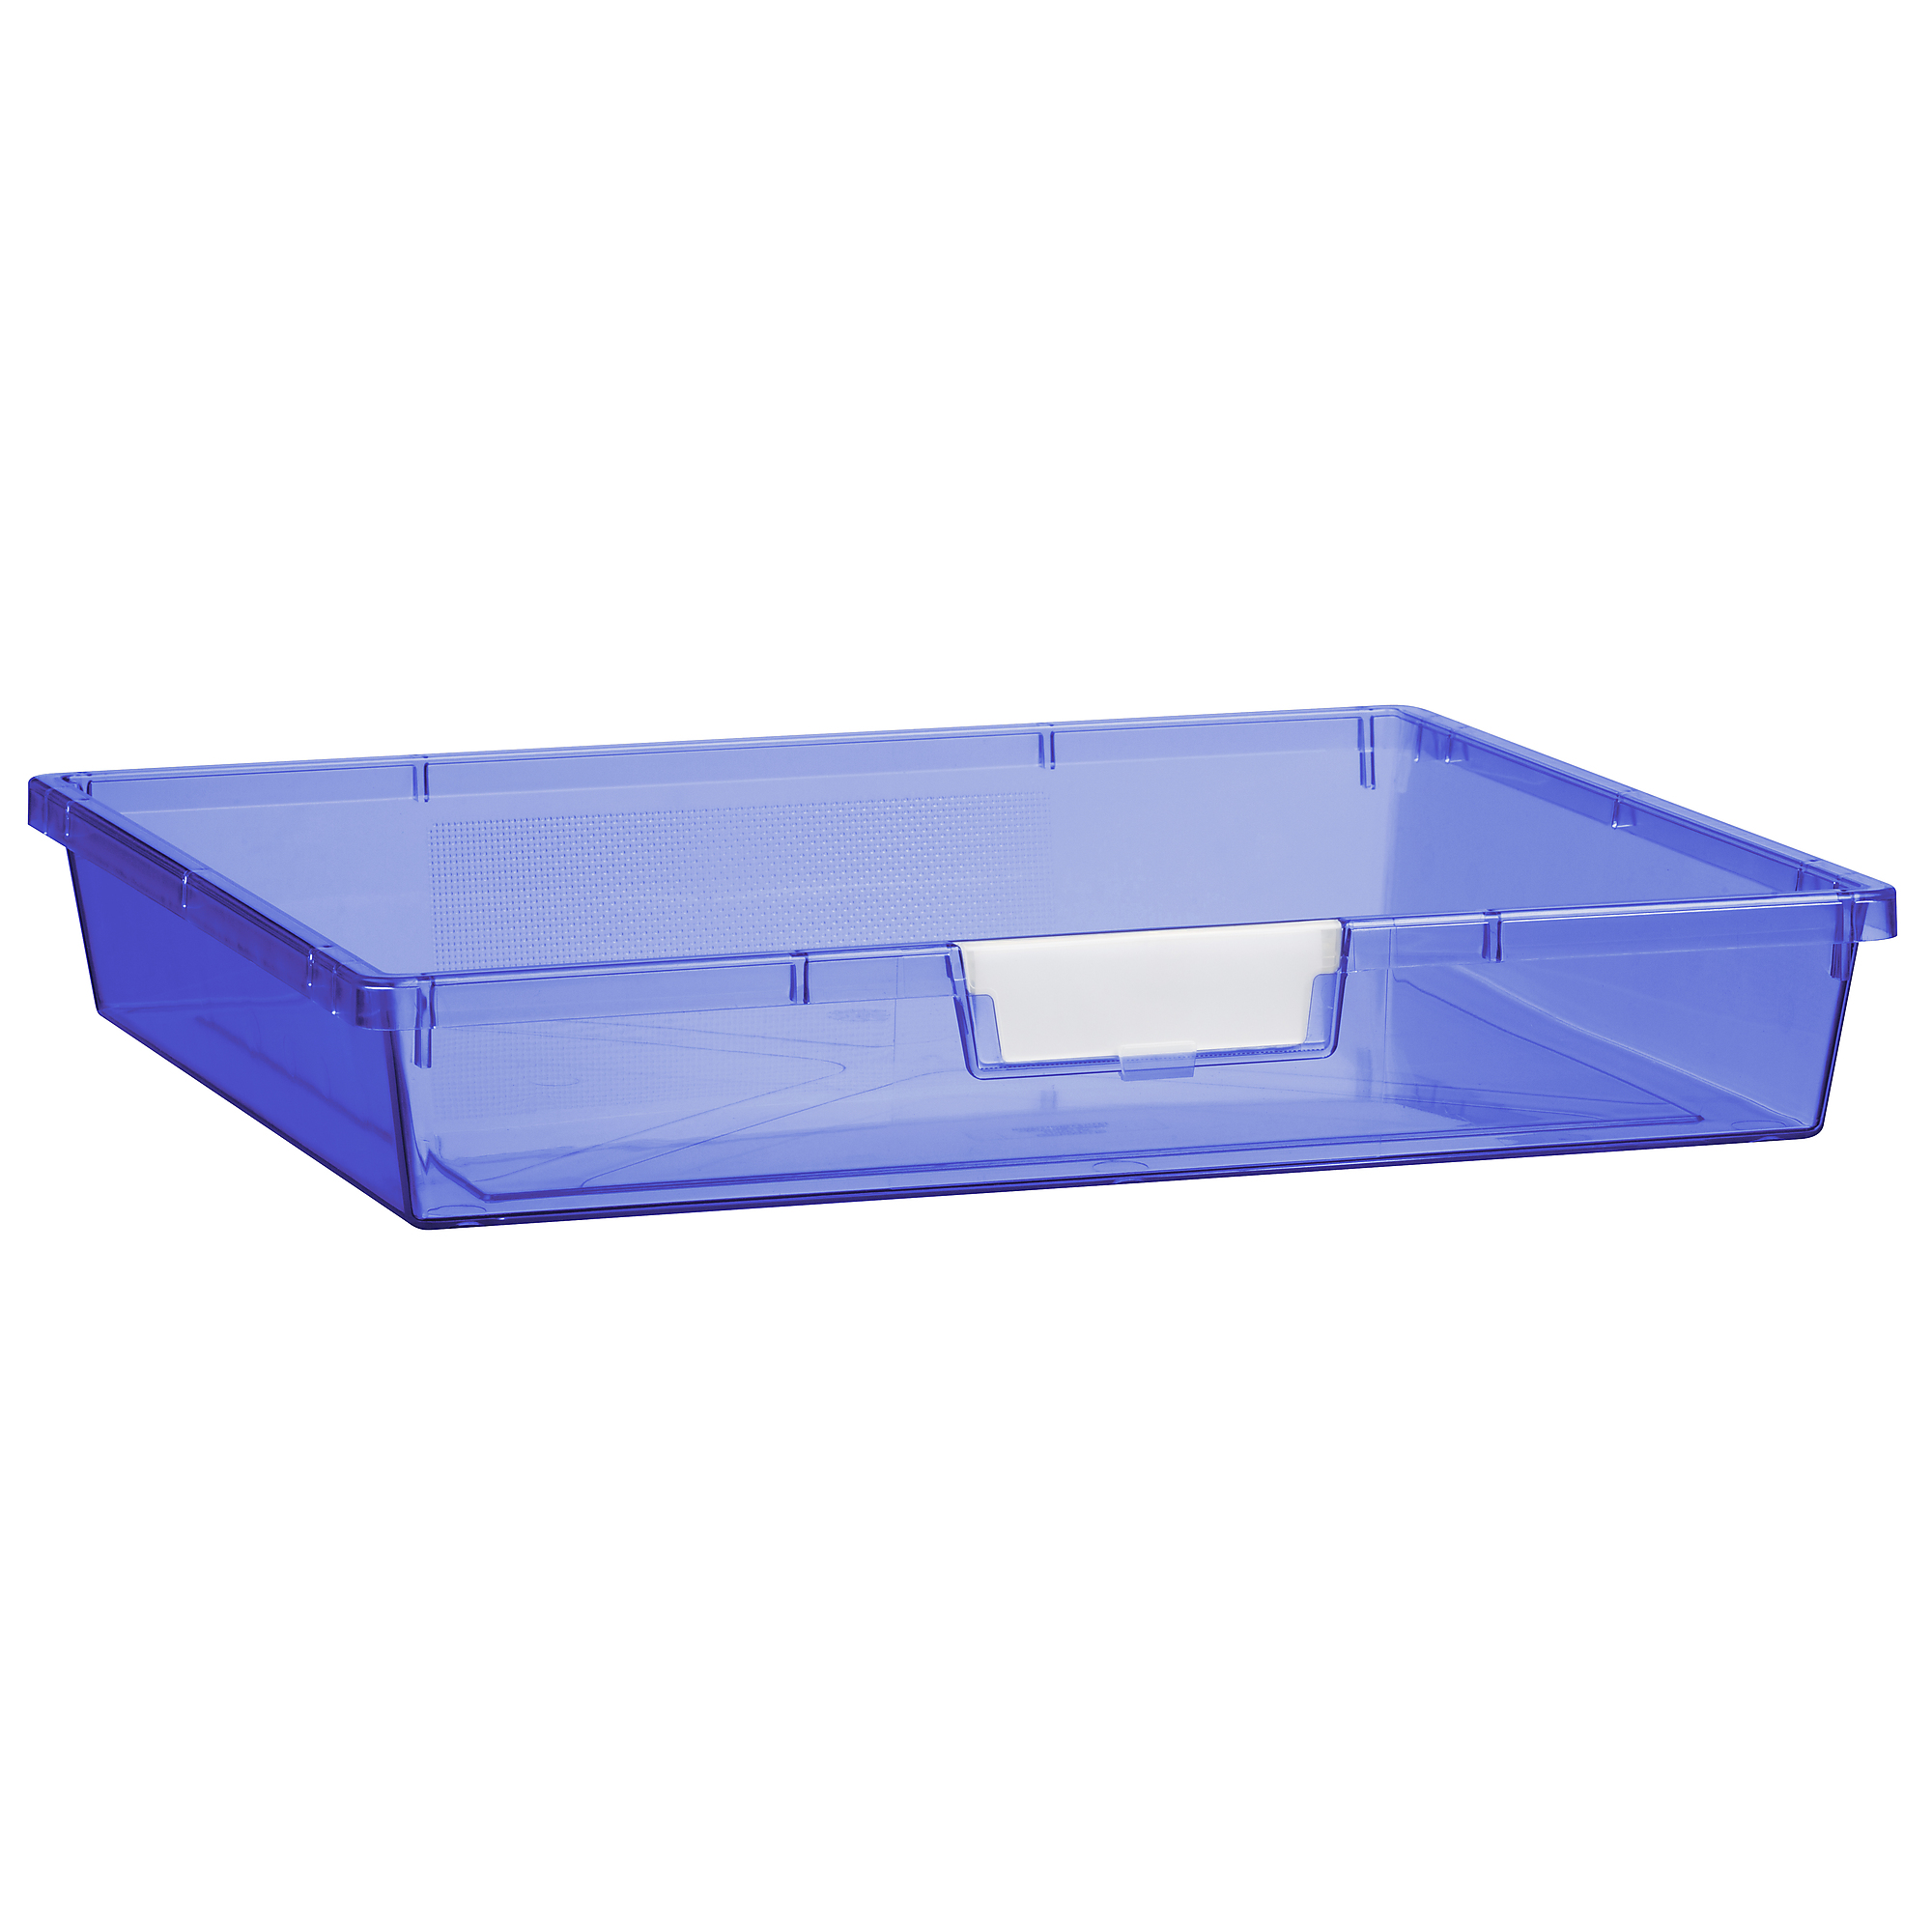 Certwood StorWerks, Wide Line Tray 3Inch in Tinted Blue - 3 Pack, Included (qty.) 3, Material Plastic, Height 12 in, Model CE1956TB3